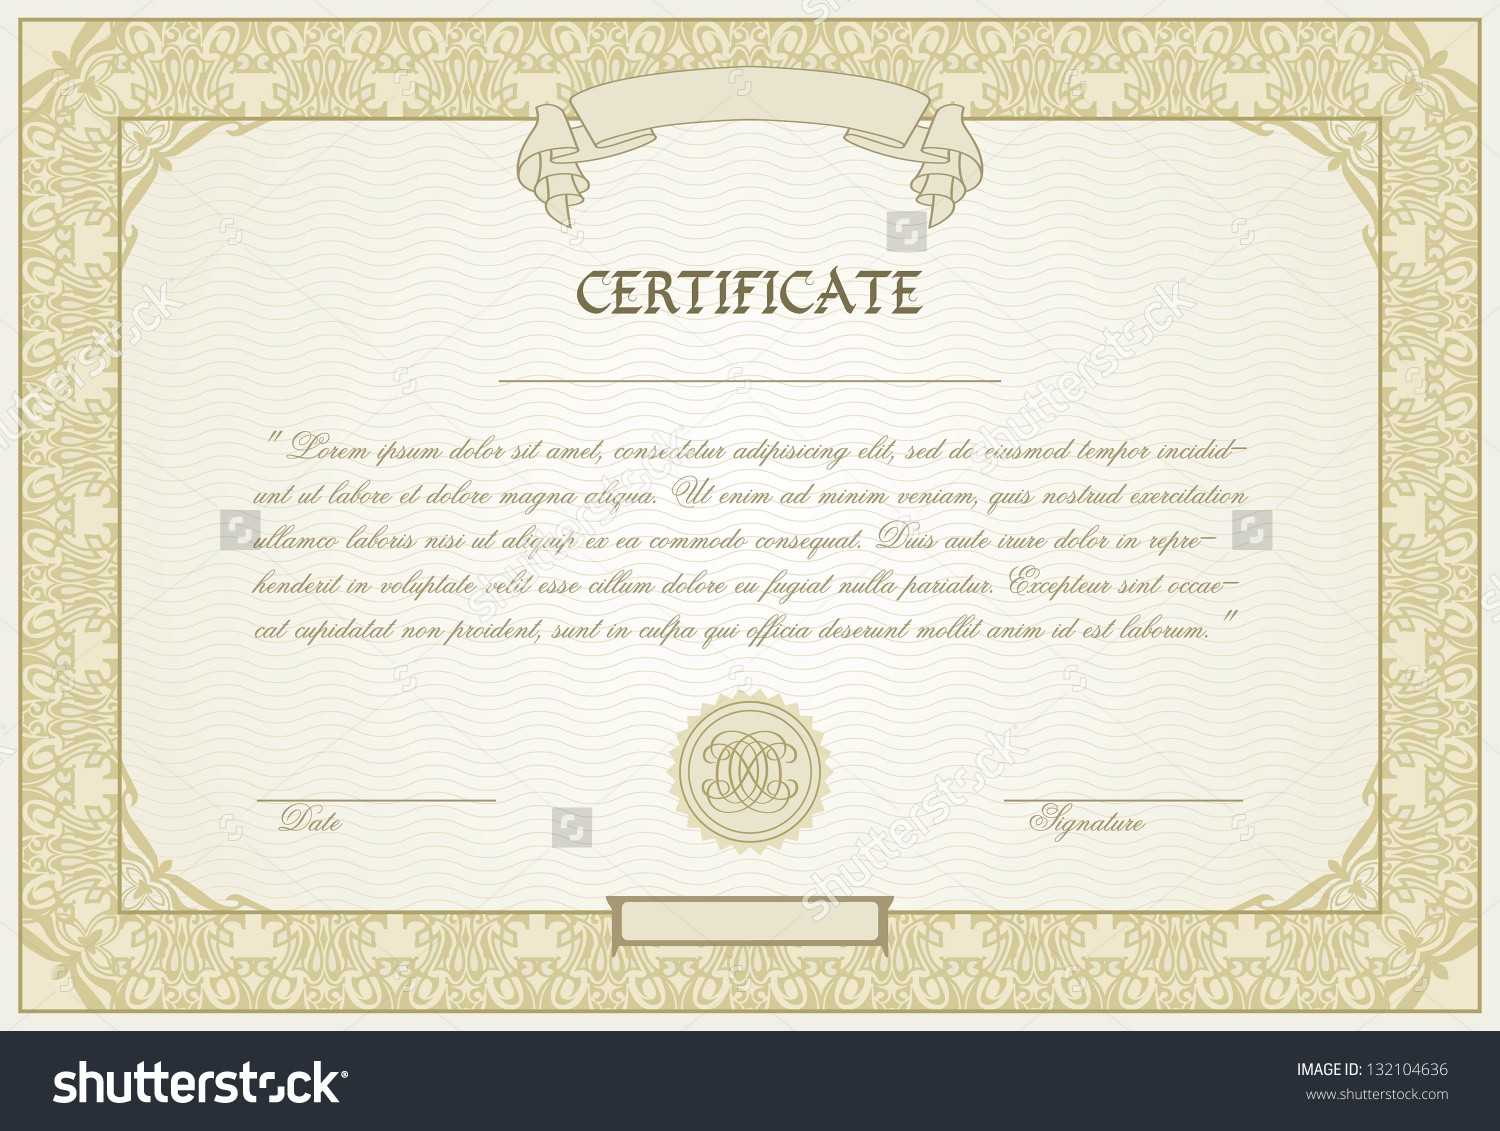 Brilliant Ideas Of Sample Award Certificate Wording For Your With Long Service Certificate Template Sample